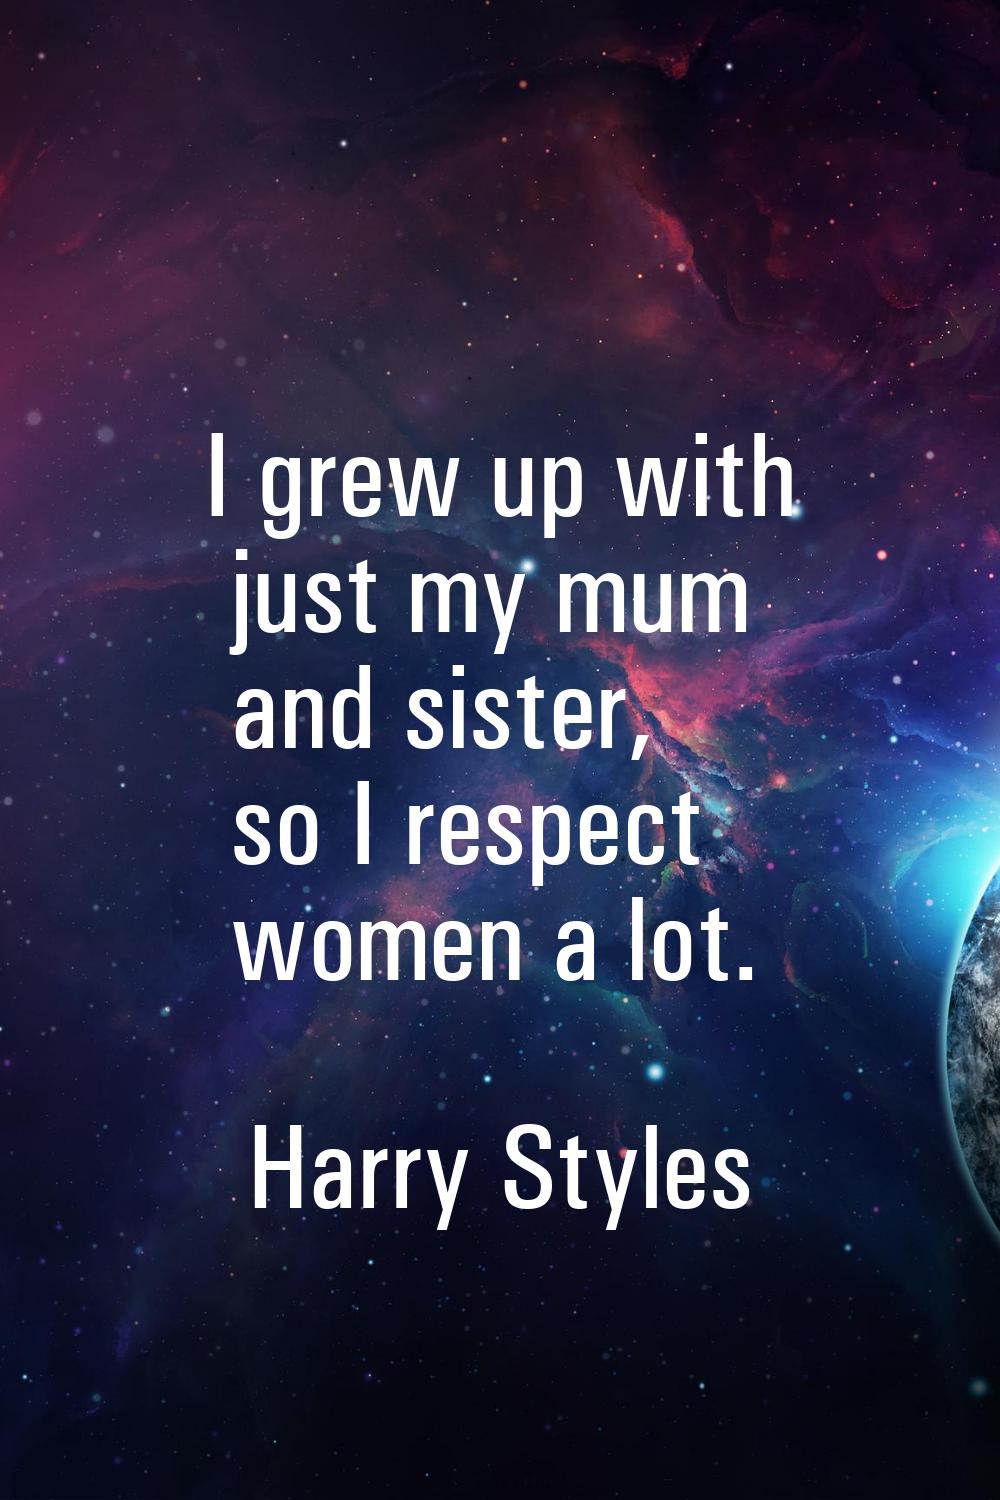 I grew up with just my mum and sister, so I respect women a lot.